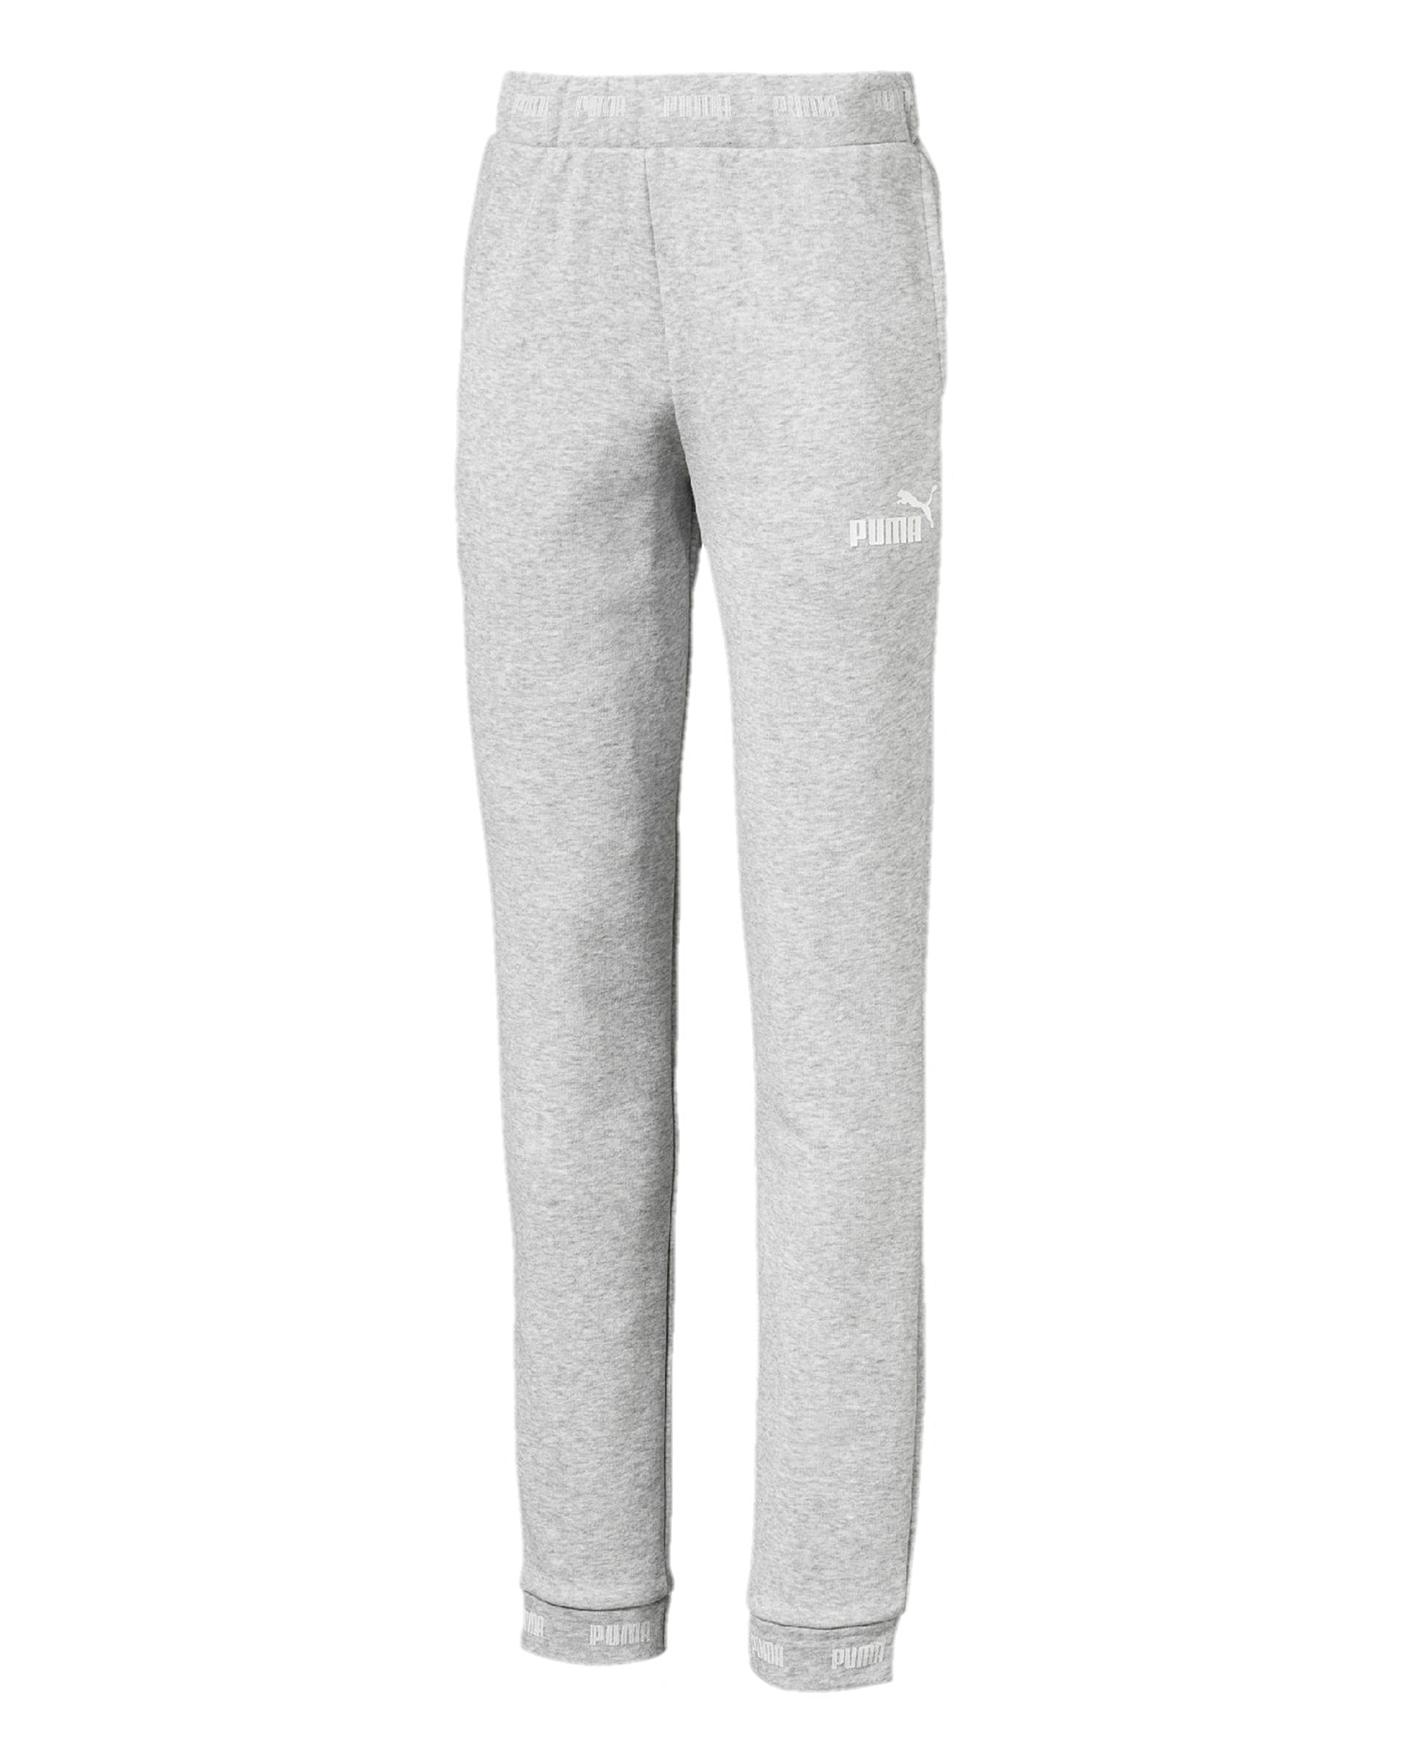 Puma Girls Grey Amplified Joggers | The Kids Division